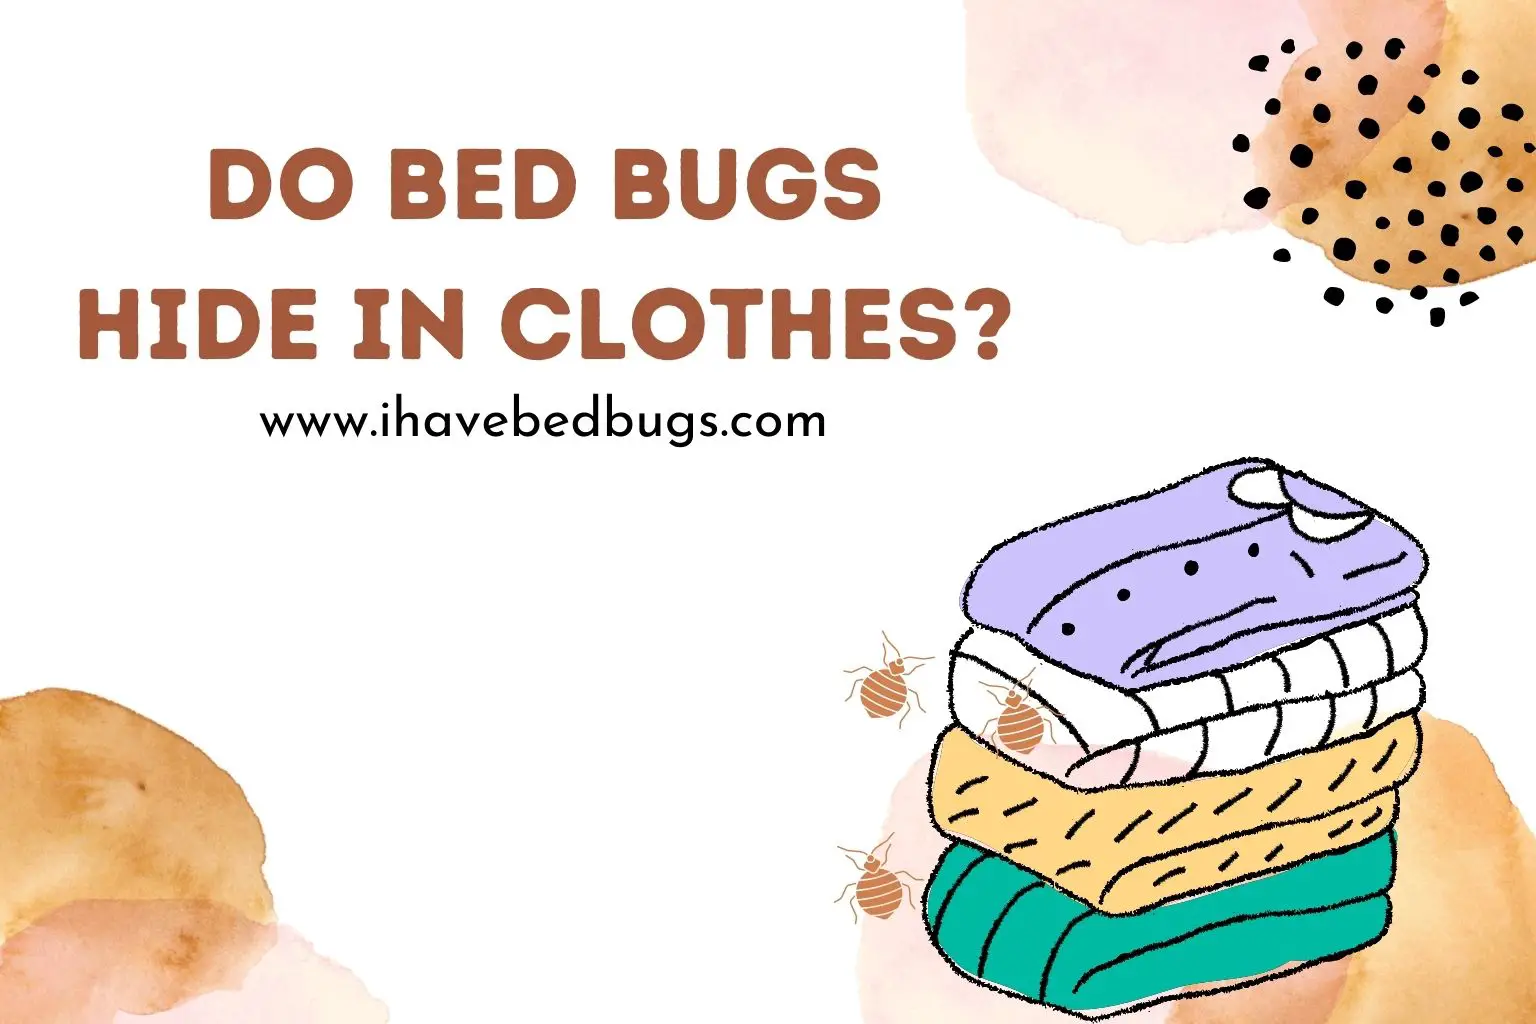 Do bed bugs hide in clothes